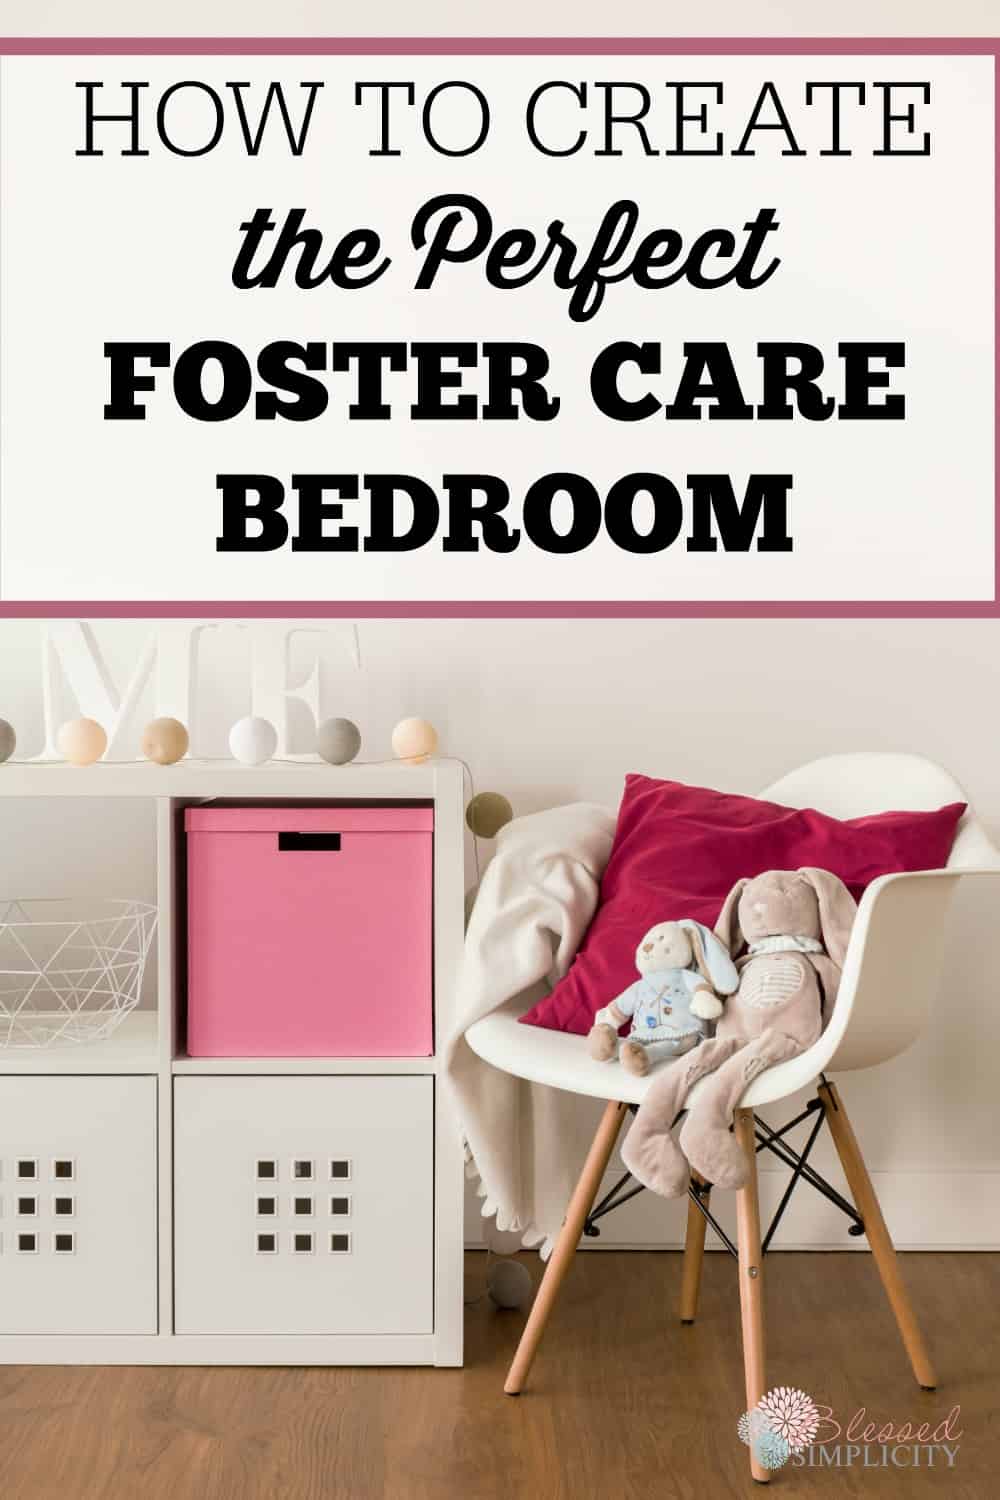 Great tips and ideas for a foster care bedroom. Plus 9 things you might not think of when setting up a room for foster care or adoption.